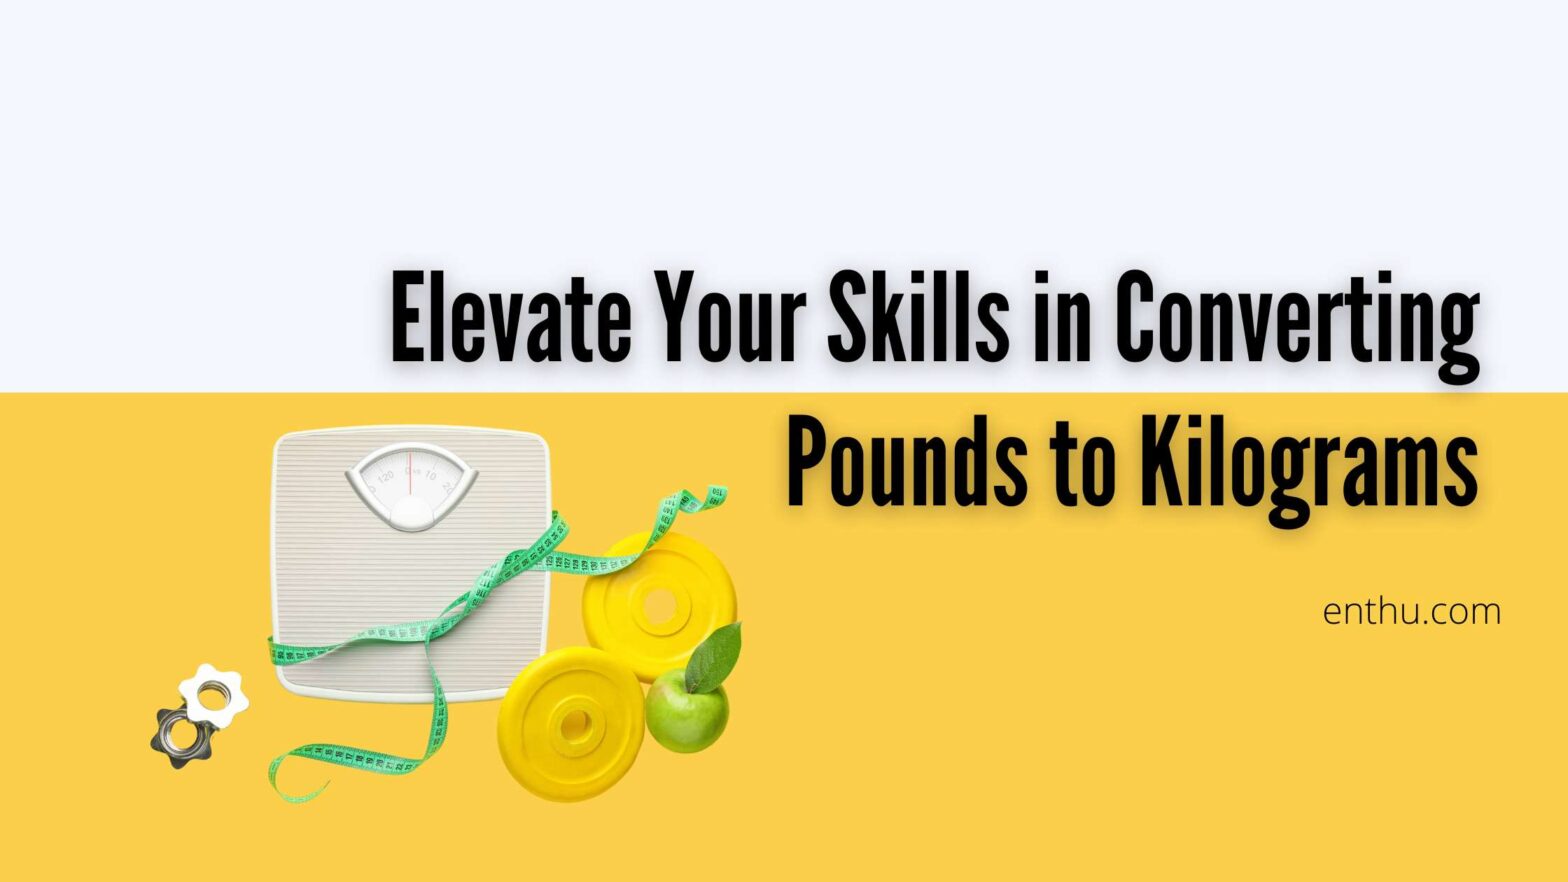 Elevate Your Skills in Converting Pounds to Kilograms